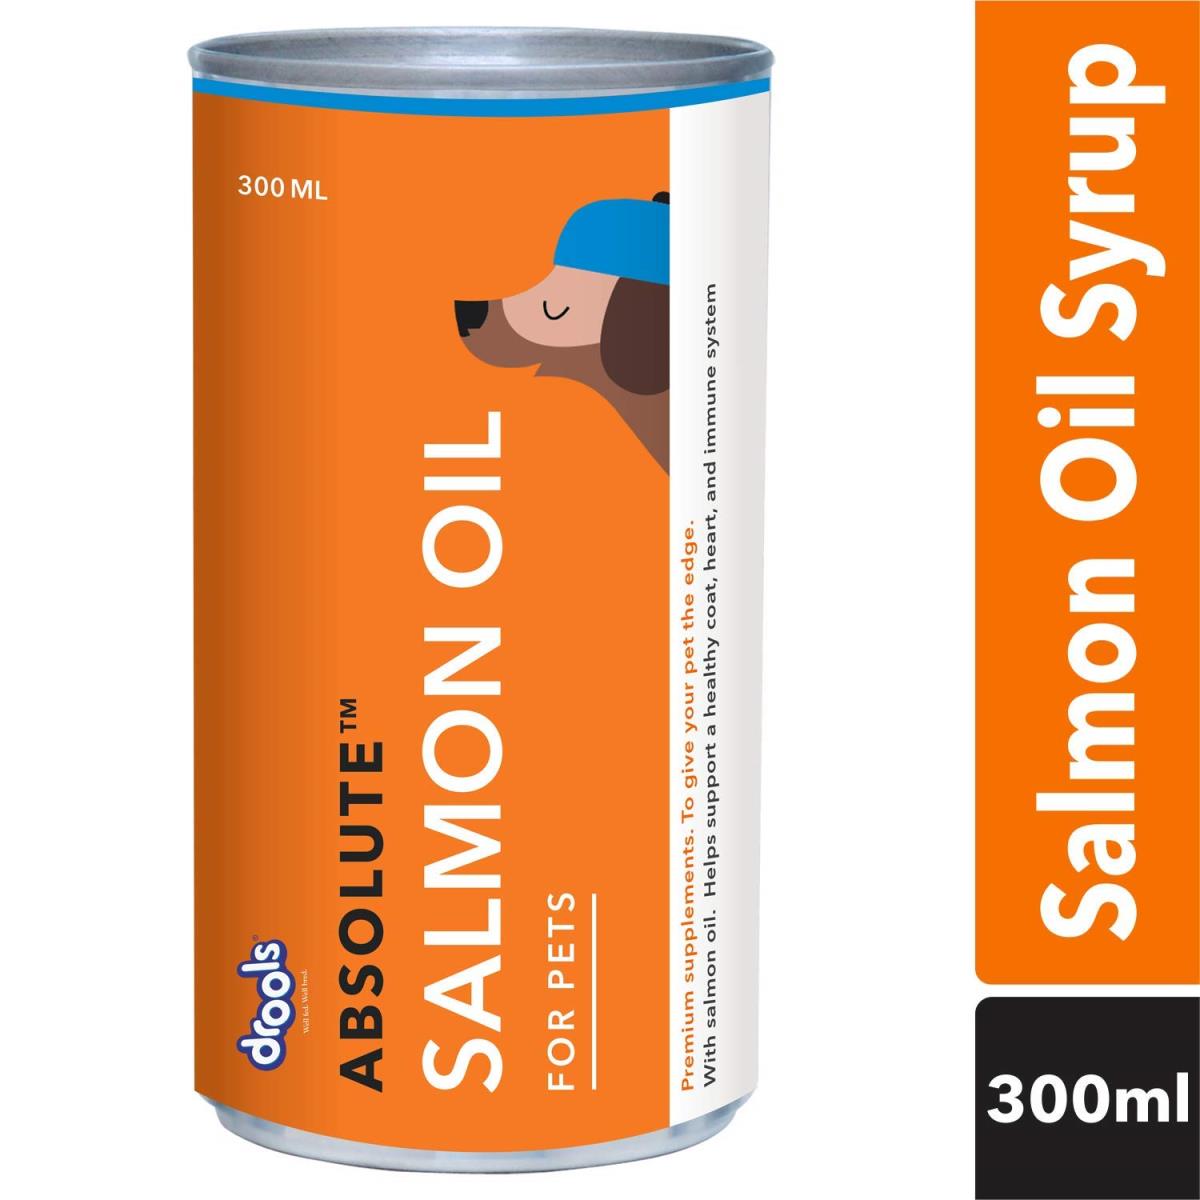 Drools Absolute Salmon Oil Syrup 300ml